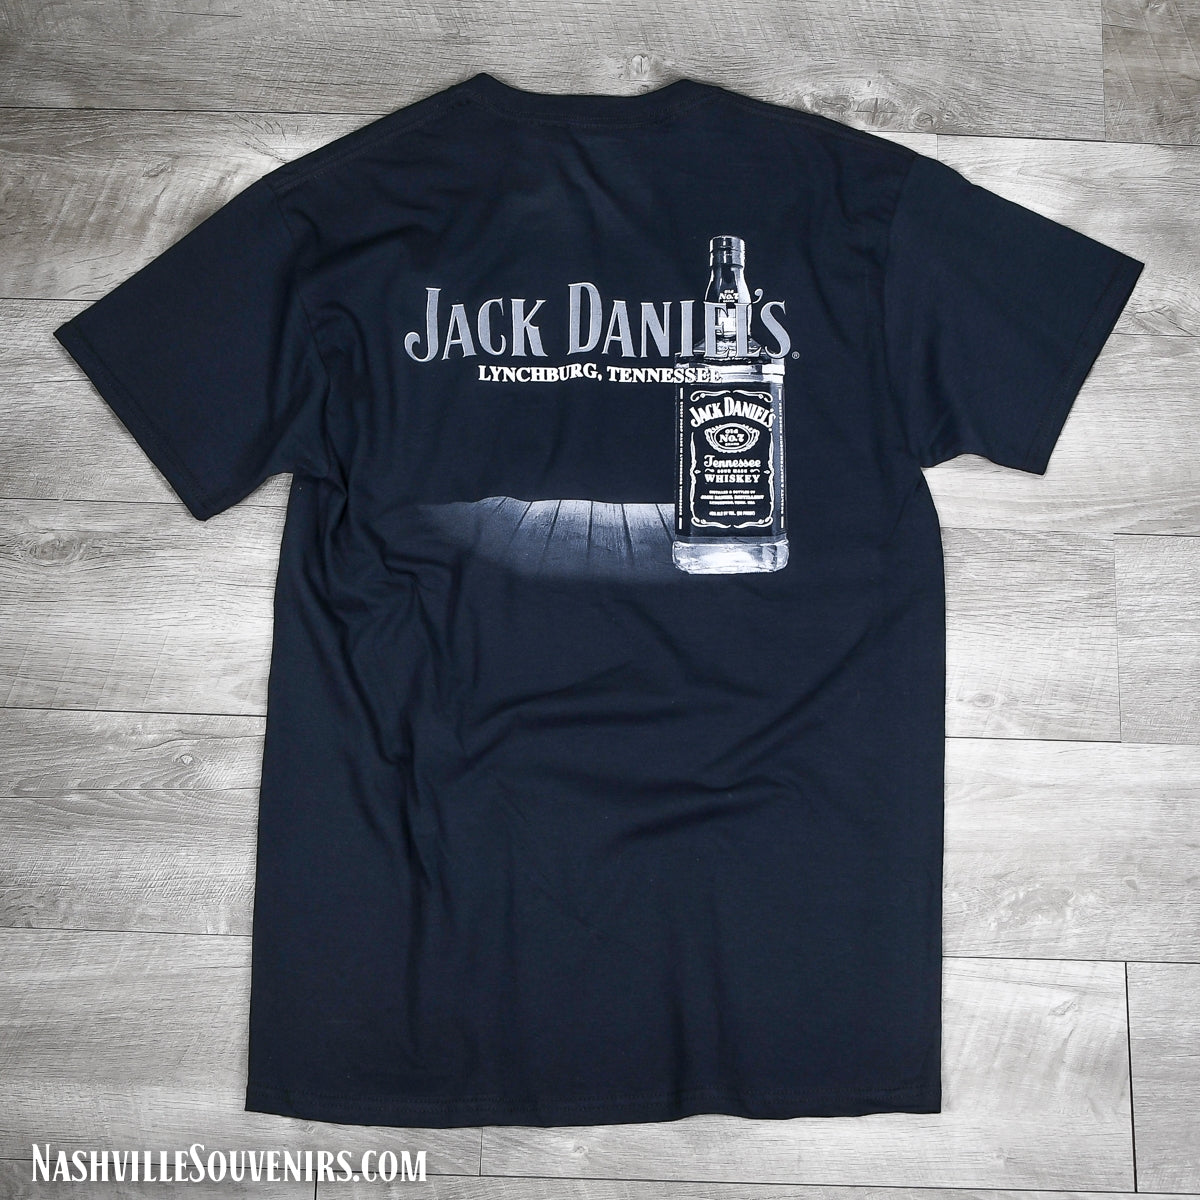 Great Jack Daniels Lynchburg, Tennessee t-shirt featuring a bottle of whiskey, sitting on an old country porch. Get it today with FREE SHIPPING on all US orders over $75!